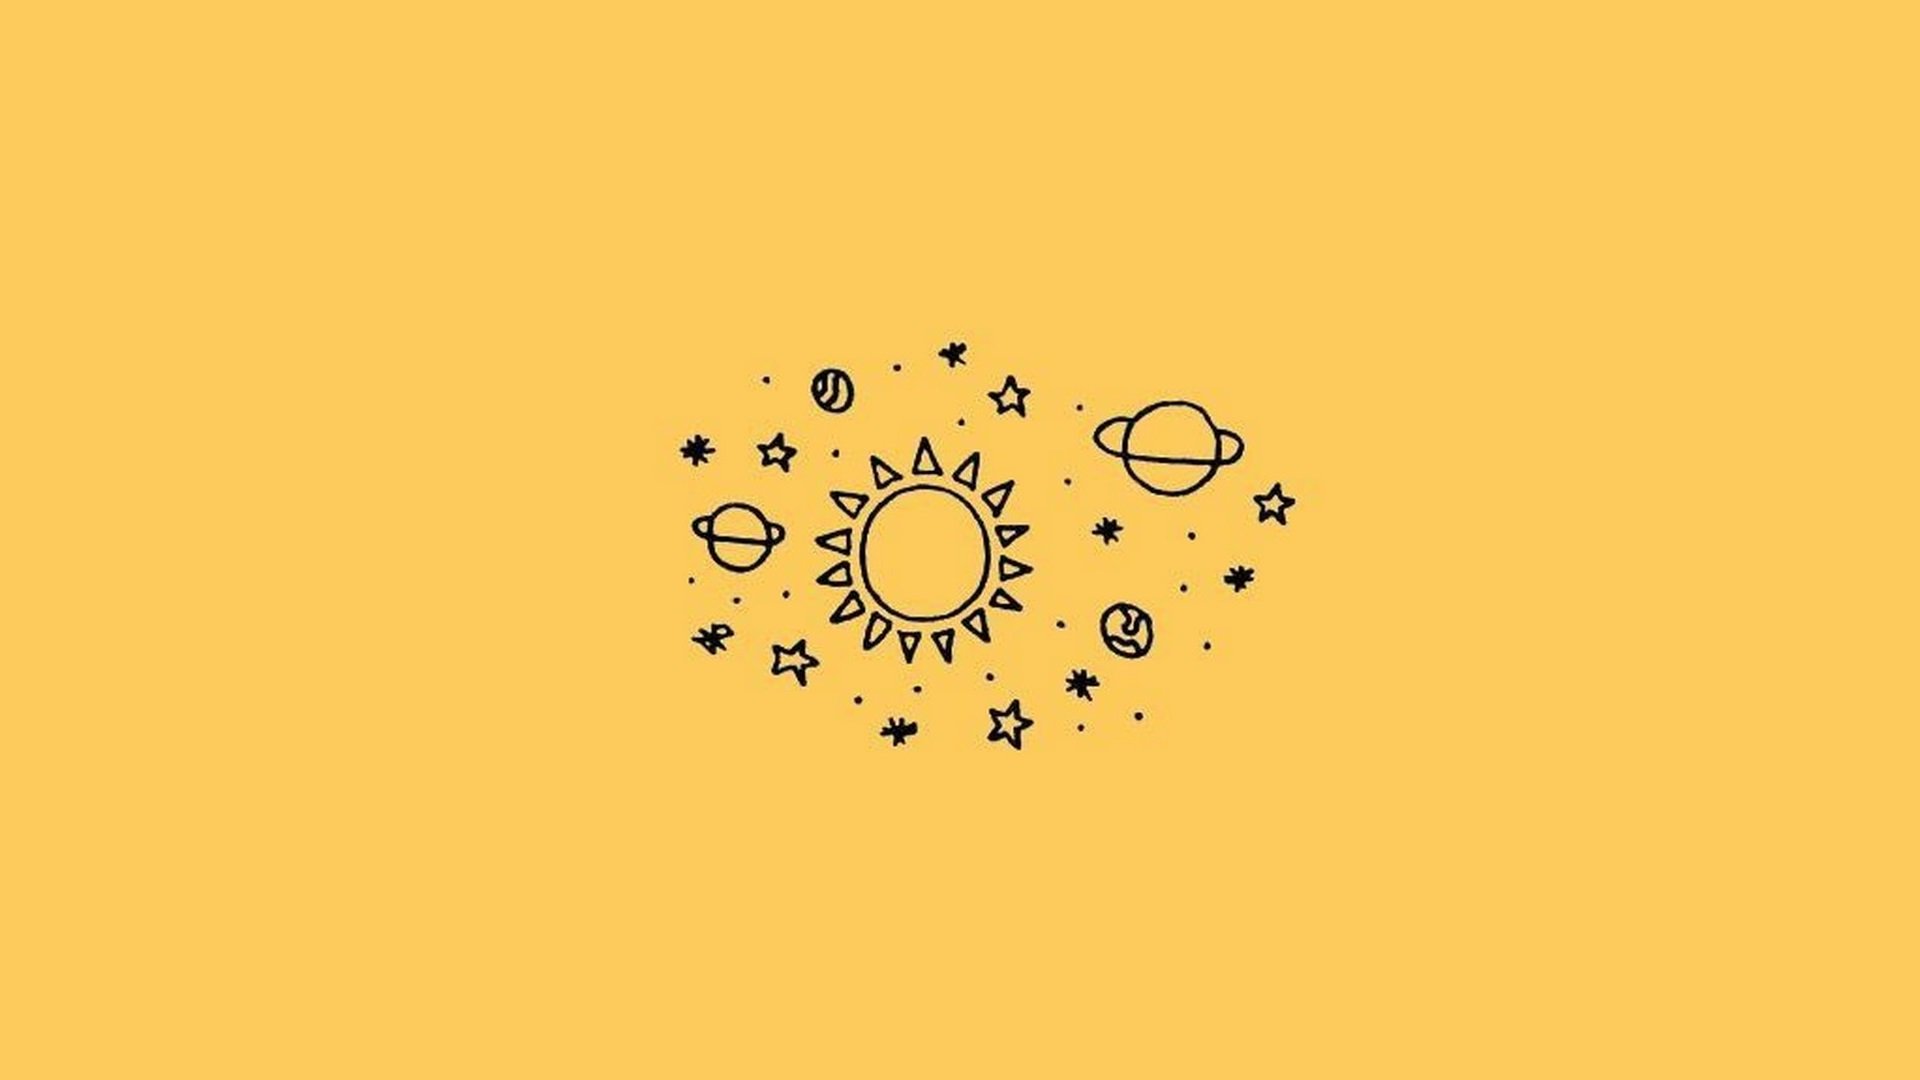 A space logo with the sun and planets - Yellow